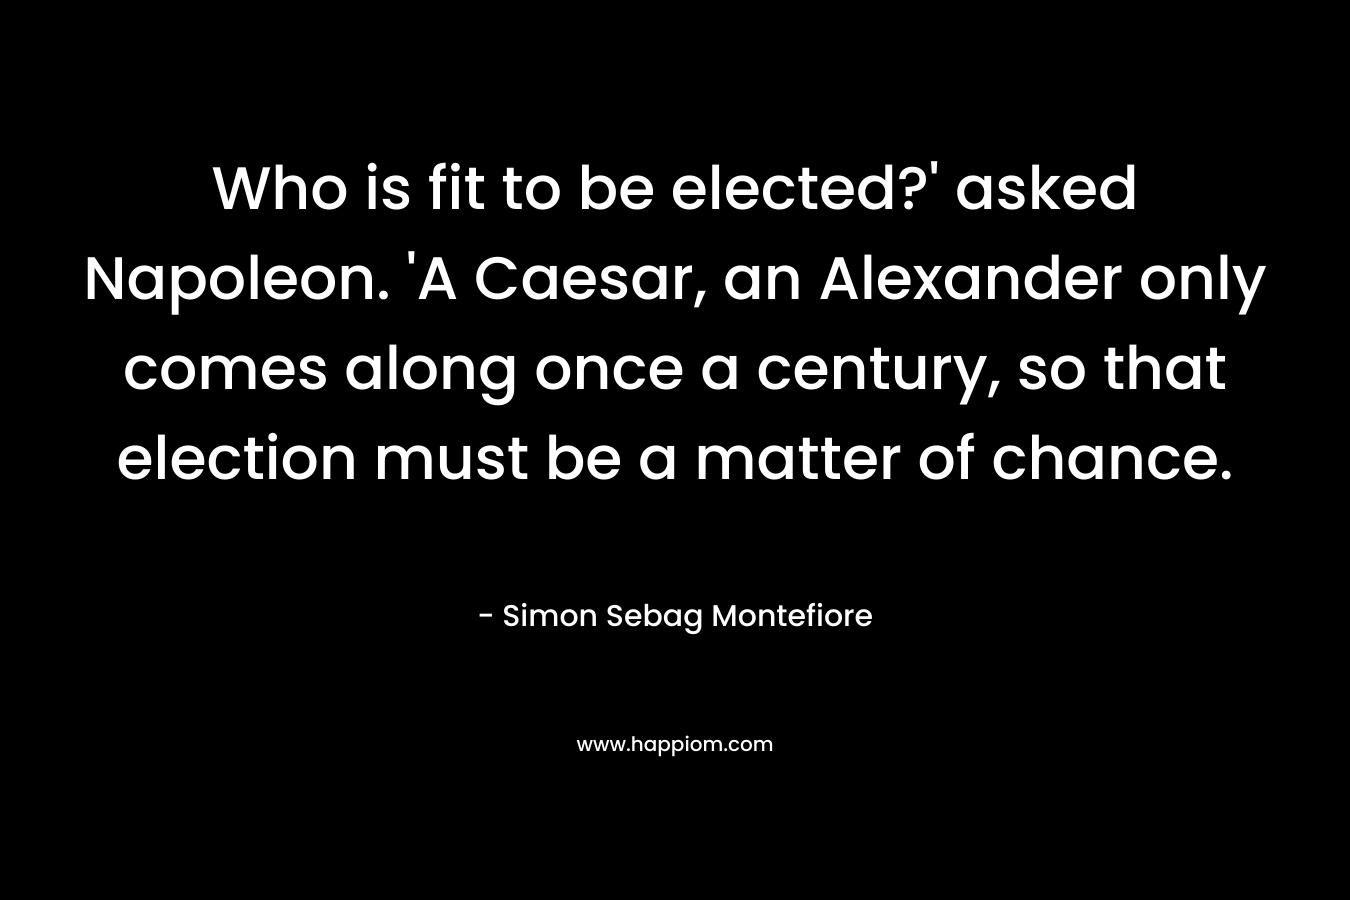 Who is fit to be elected?’ asked Napoleon. ‘A Caesar, an Alexander only comes along once a century, so that election must be a matter of chance. – Simon Sebag Montefiore